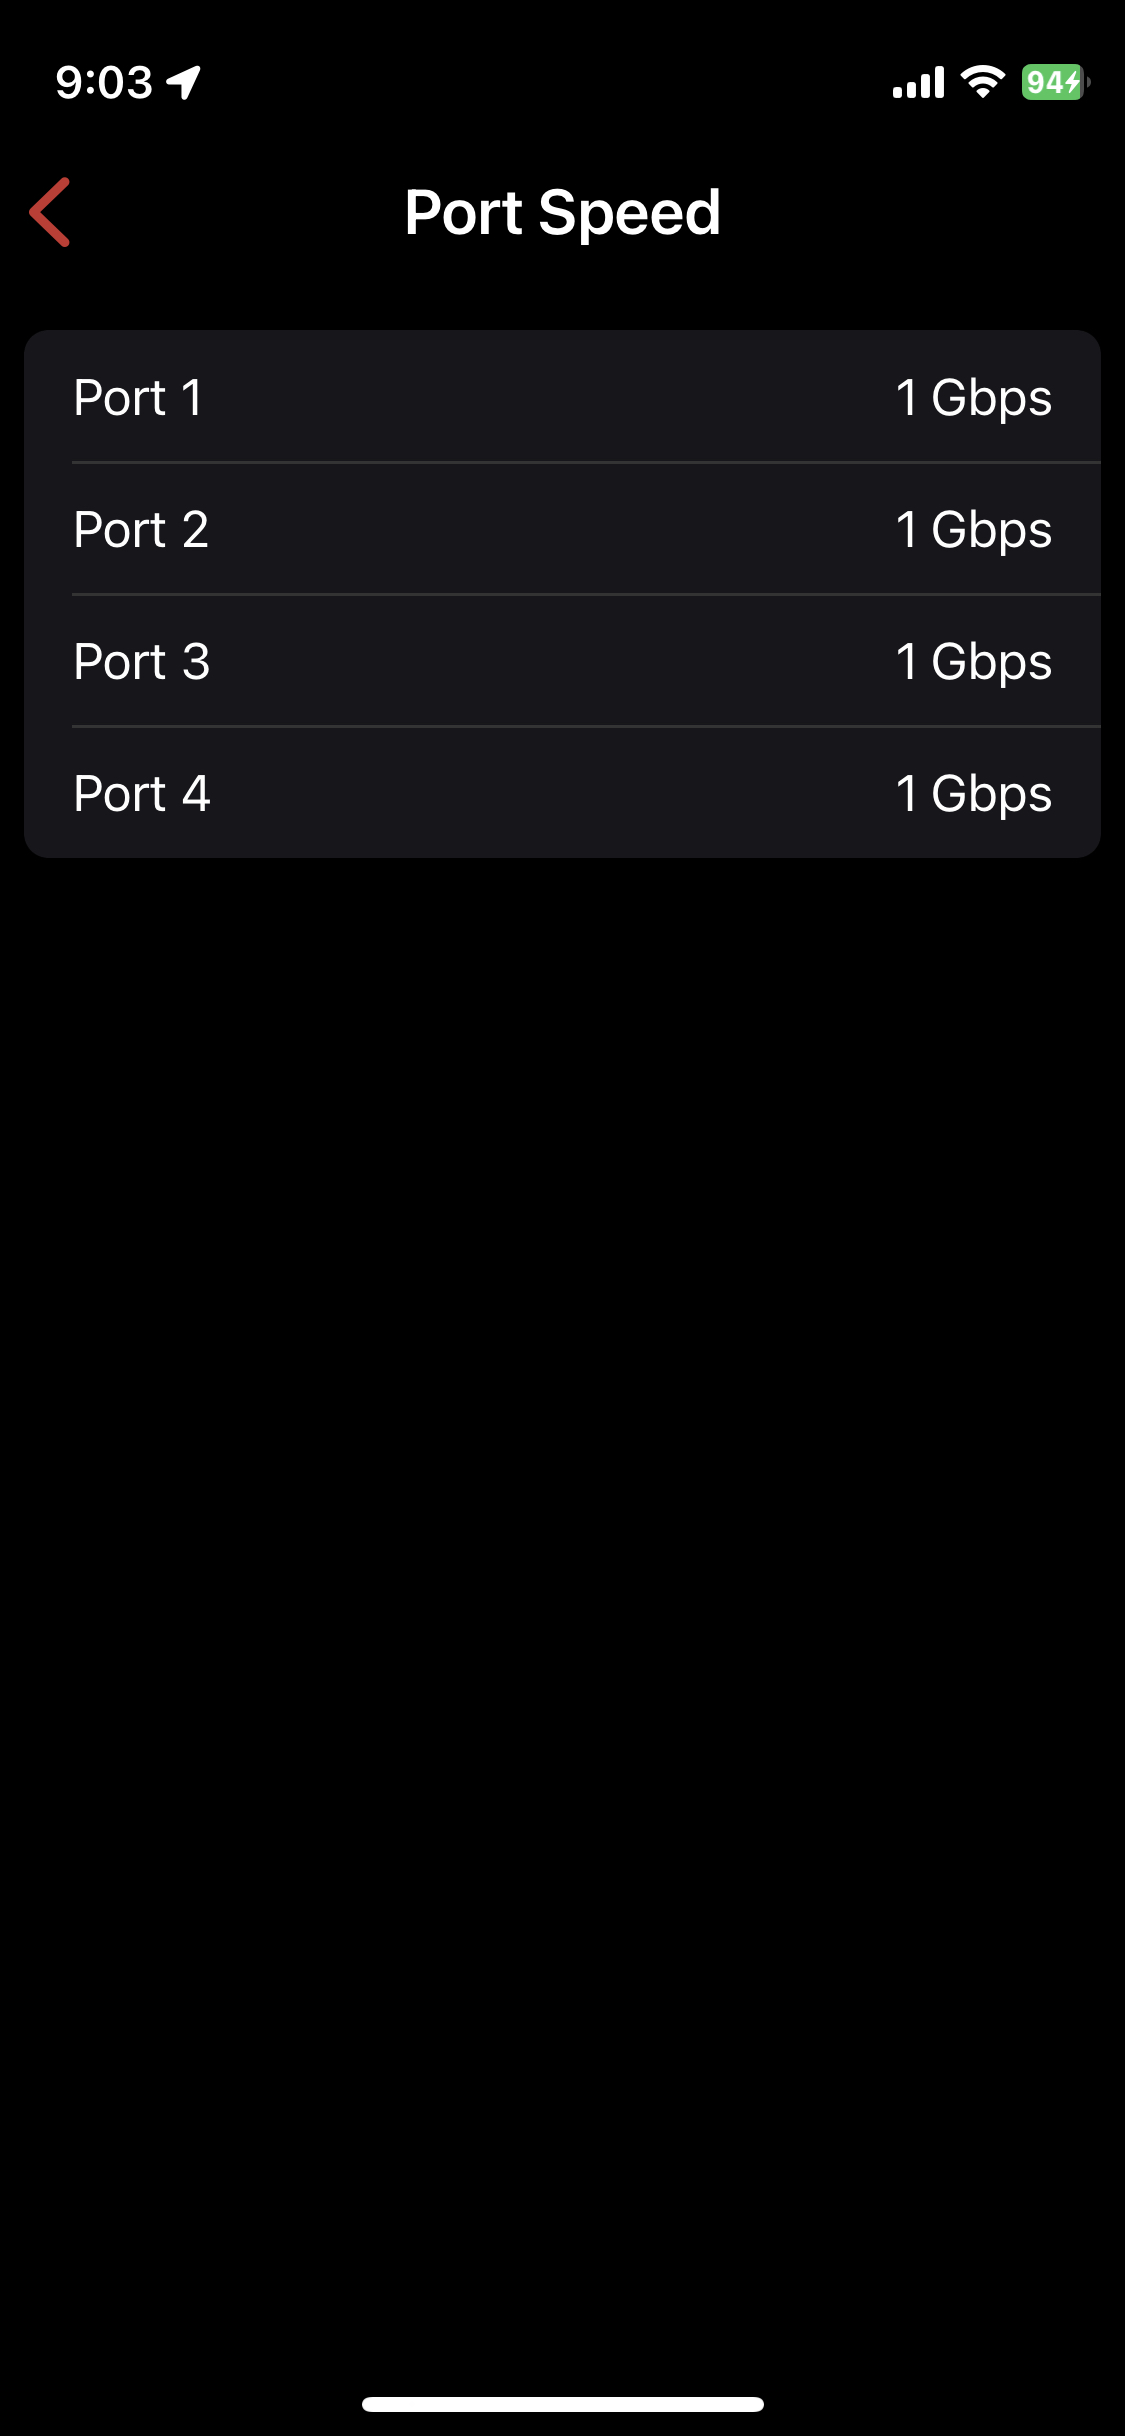 LAN Port Speed connections are displayed in Firewalla mobile app to aid speed test issues.